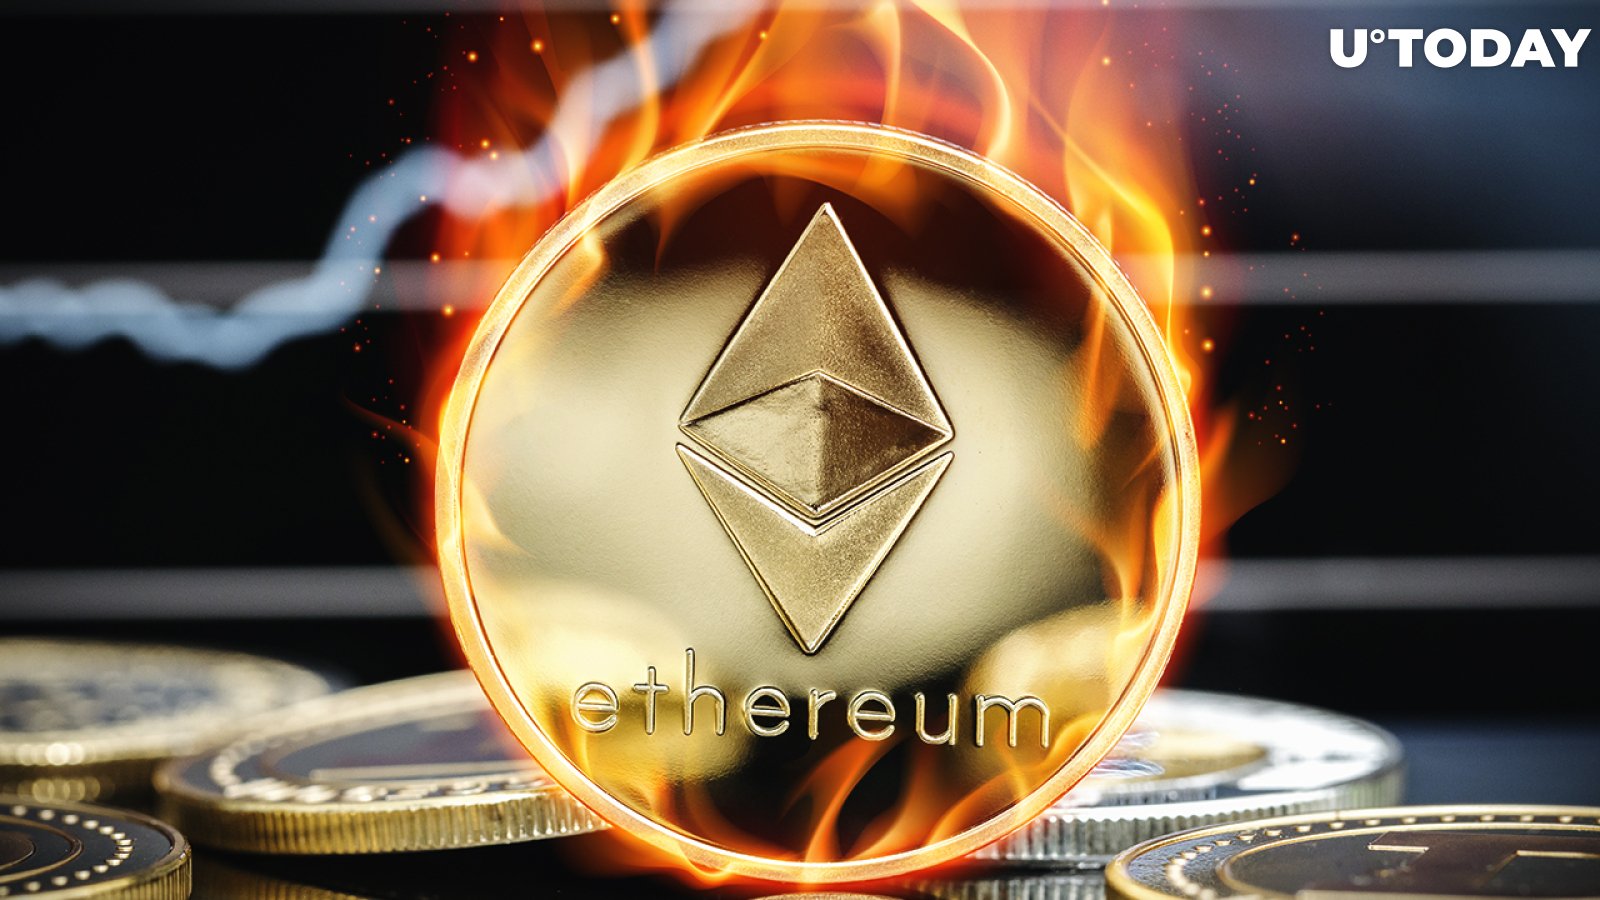 2,000% of Ethereum's Hourly Issuance Burned as Gas Price Skyrockets